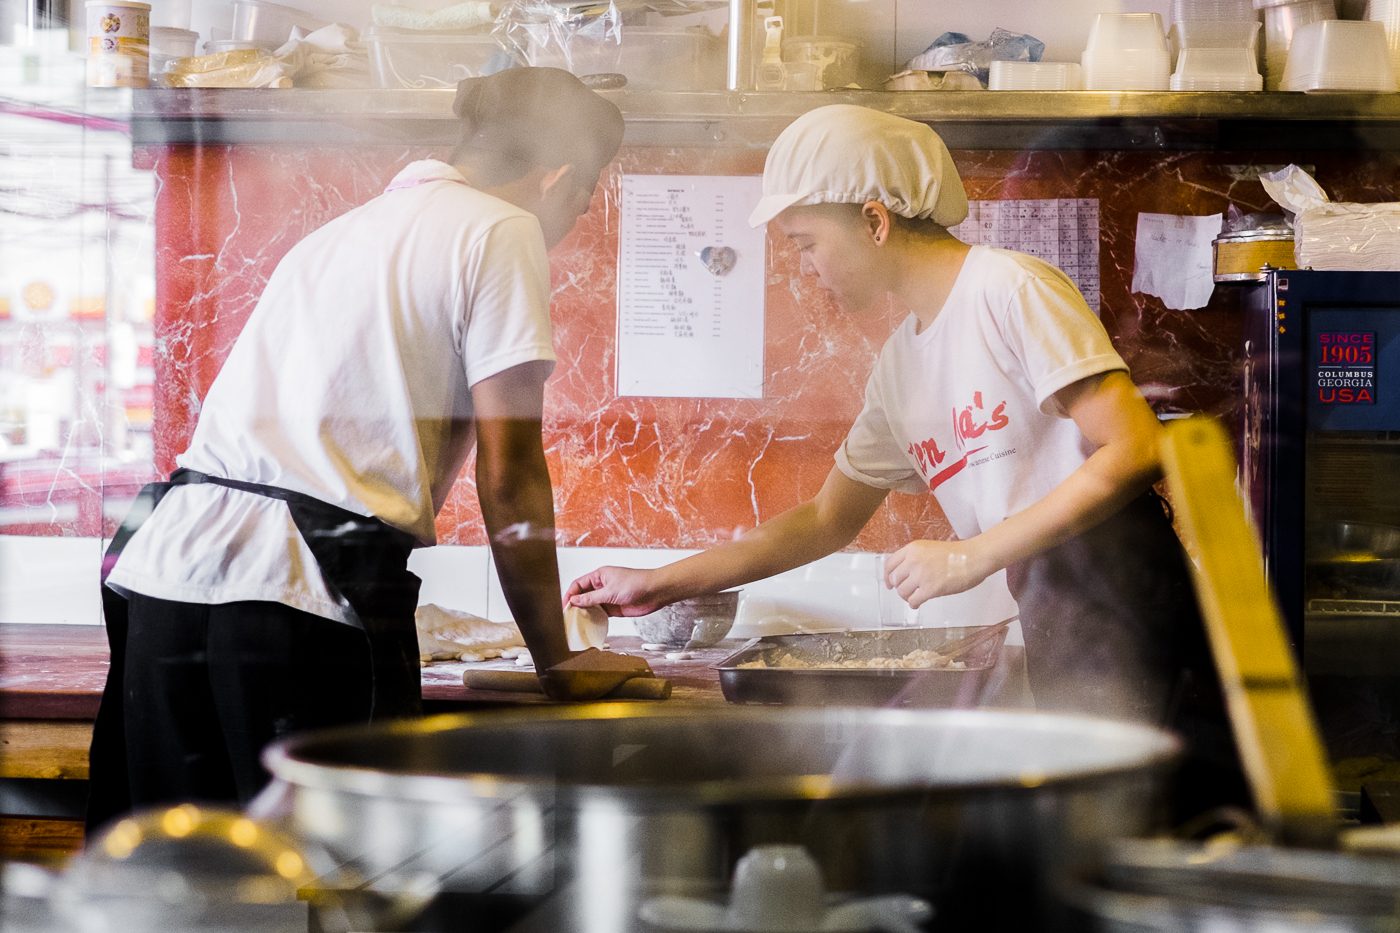 Tien Ma's chefs, trained by their Taiwanese head chef, make Xiao Long Bao. They also make their own hand-pulled noodles. 